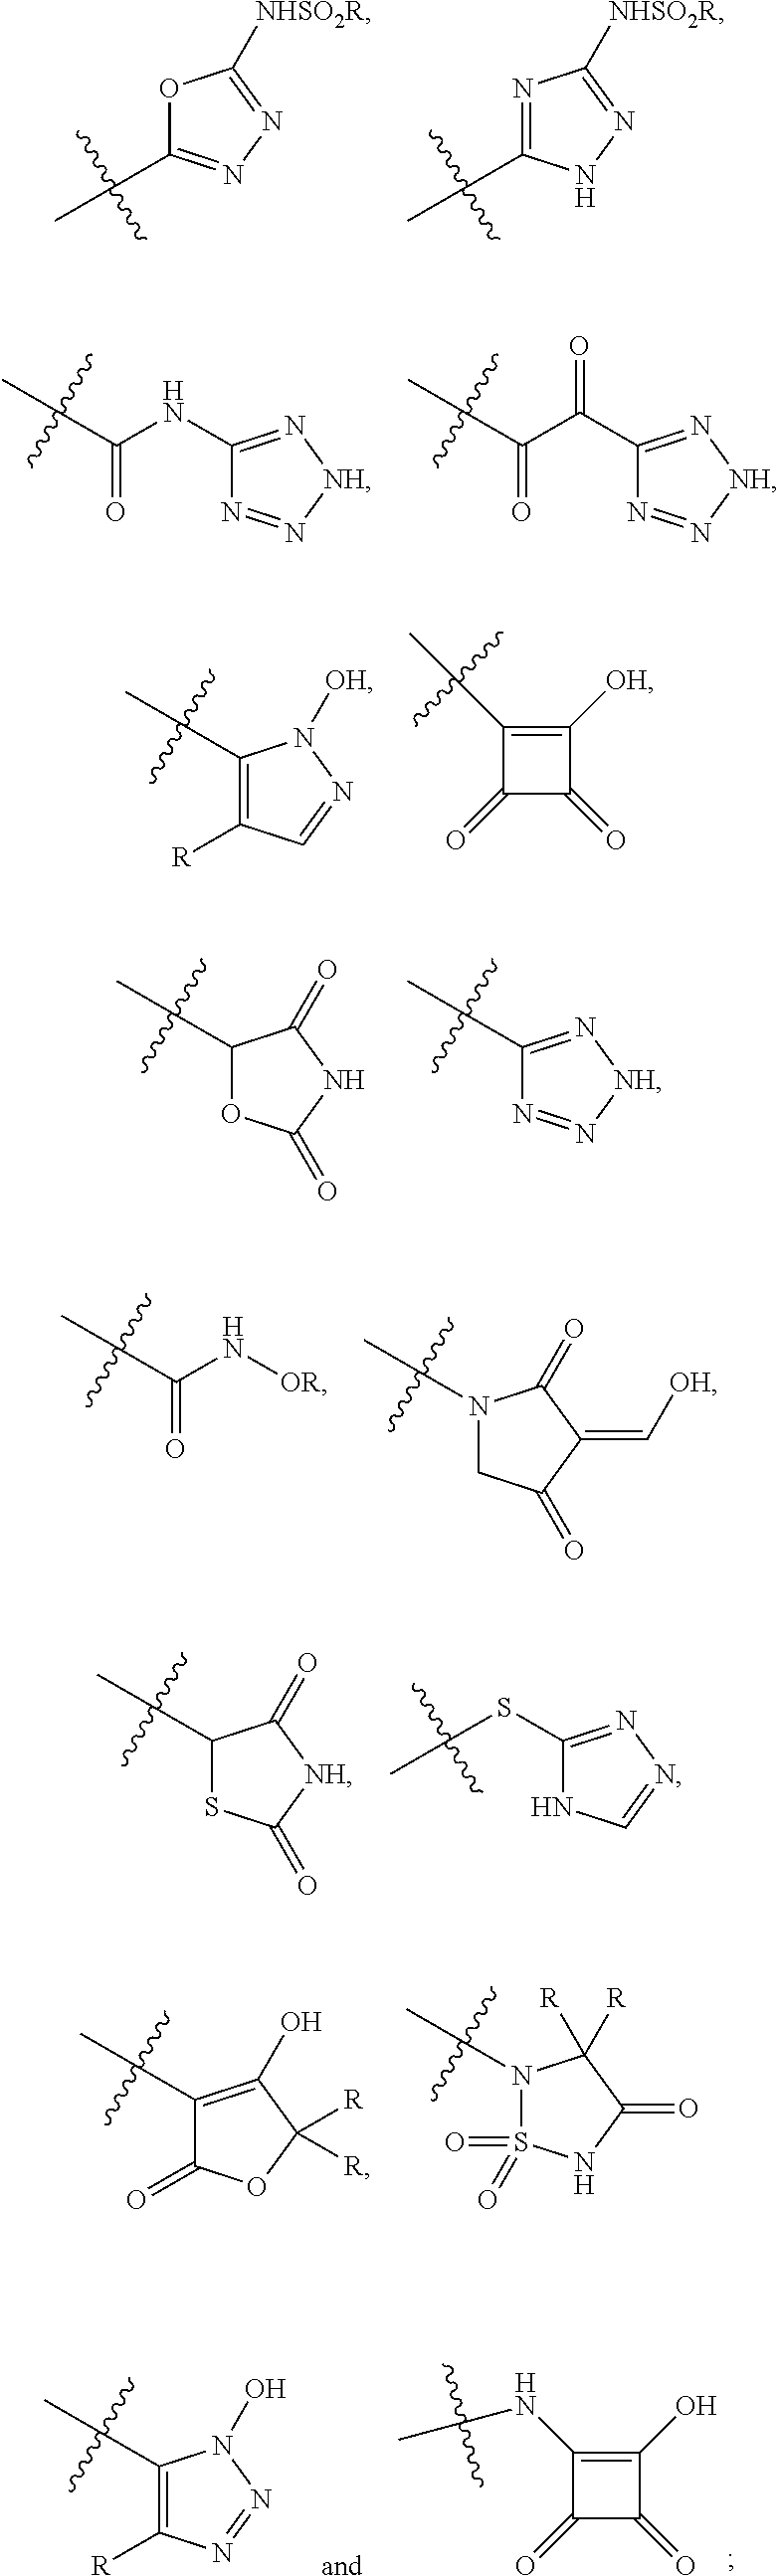 Fused heterocyclic compounds as gpr120 agonists